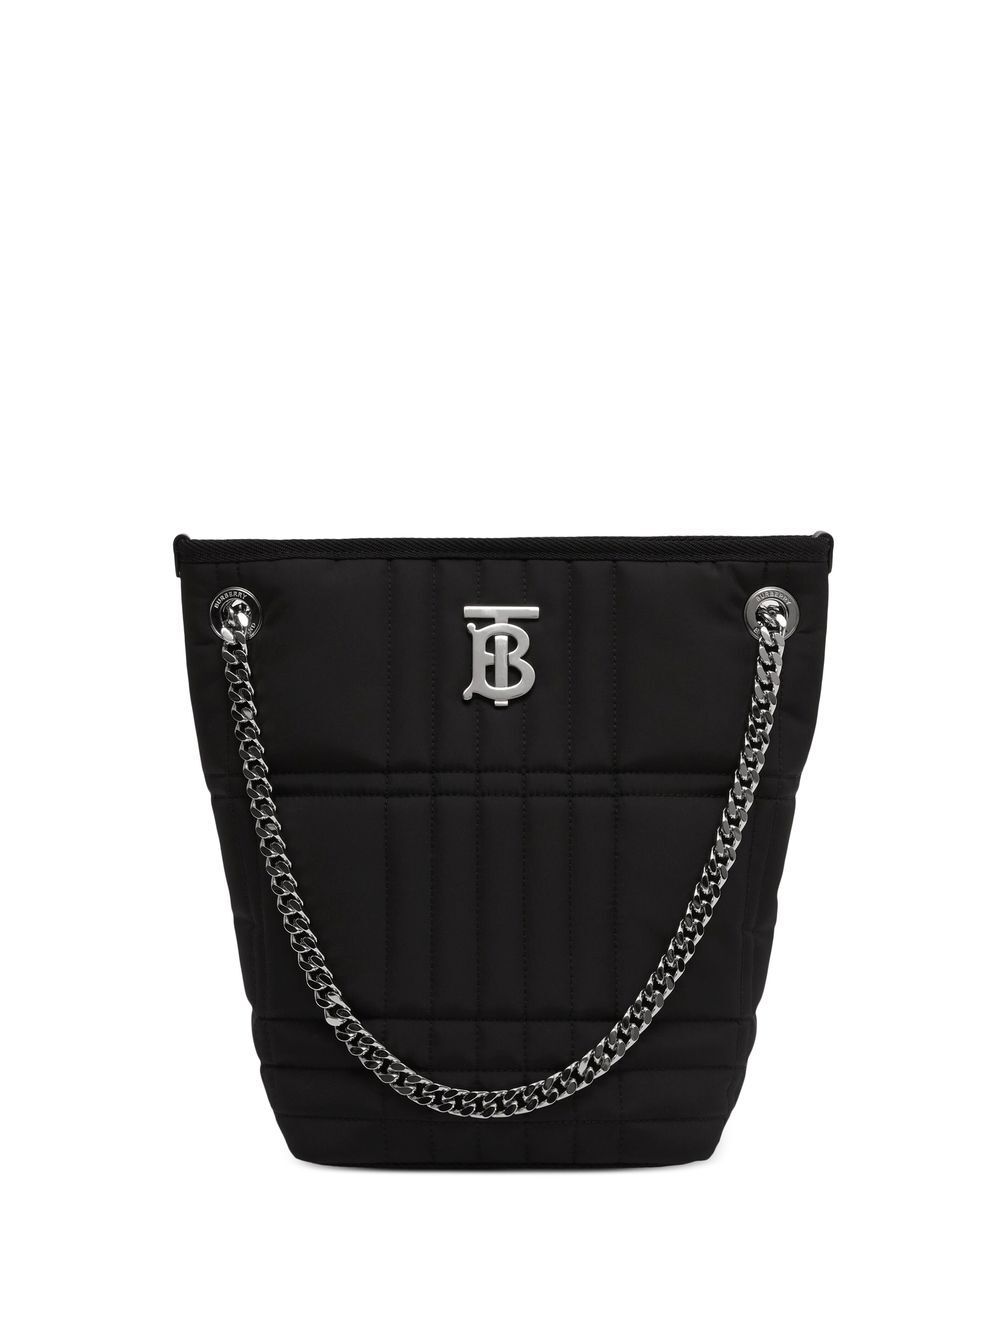 Burberry Lola small quilted bucket bag - Black